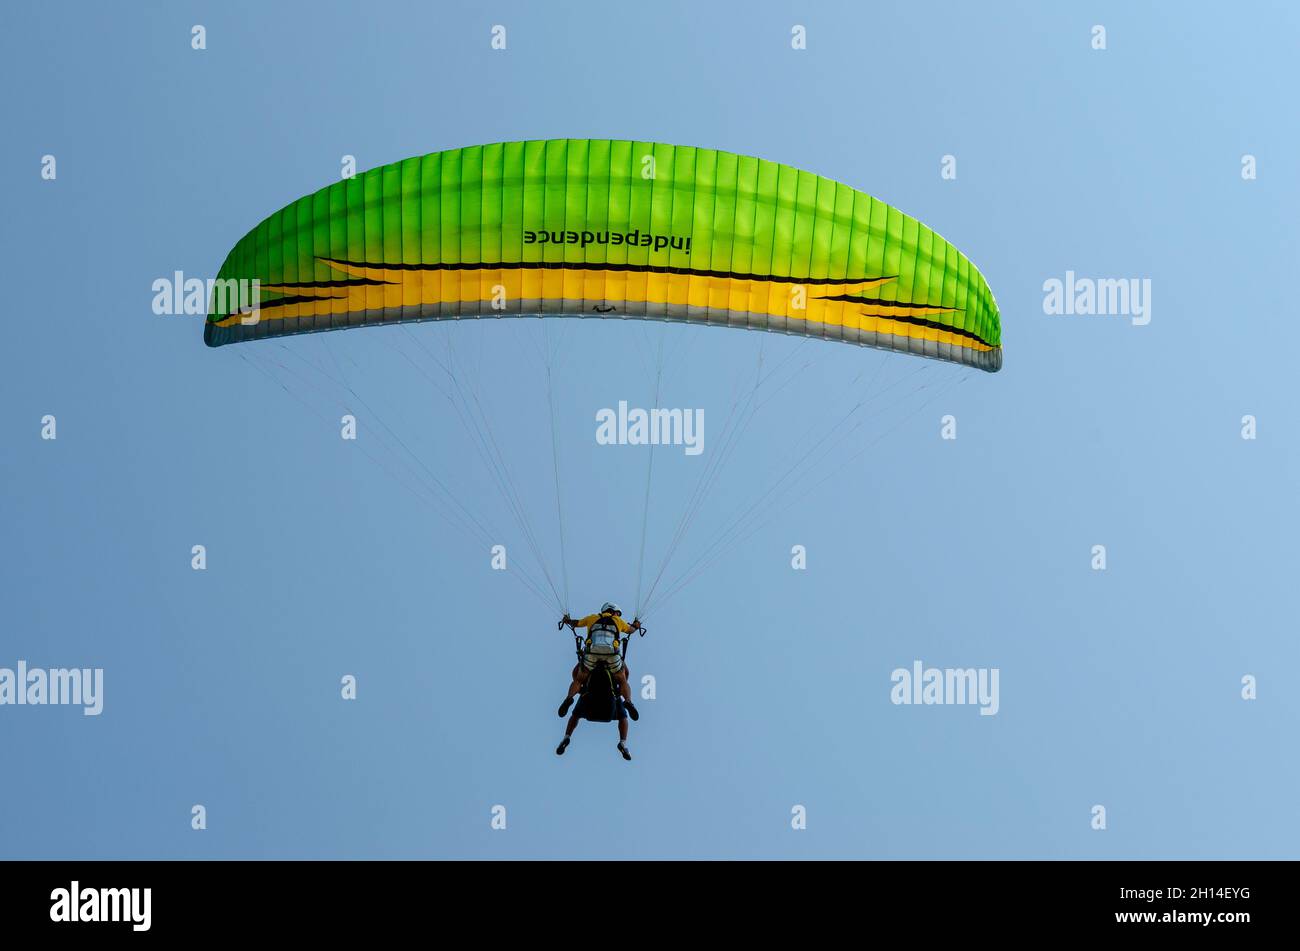 Tandem green and yellow-colored parachute against clear blue sky. Stock Photo